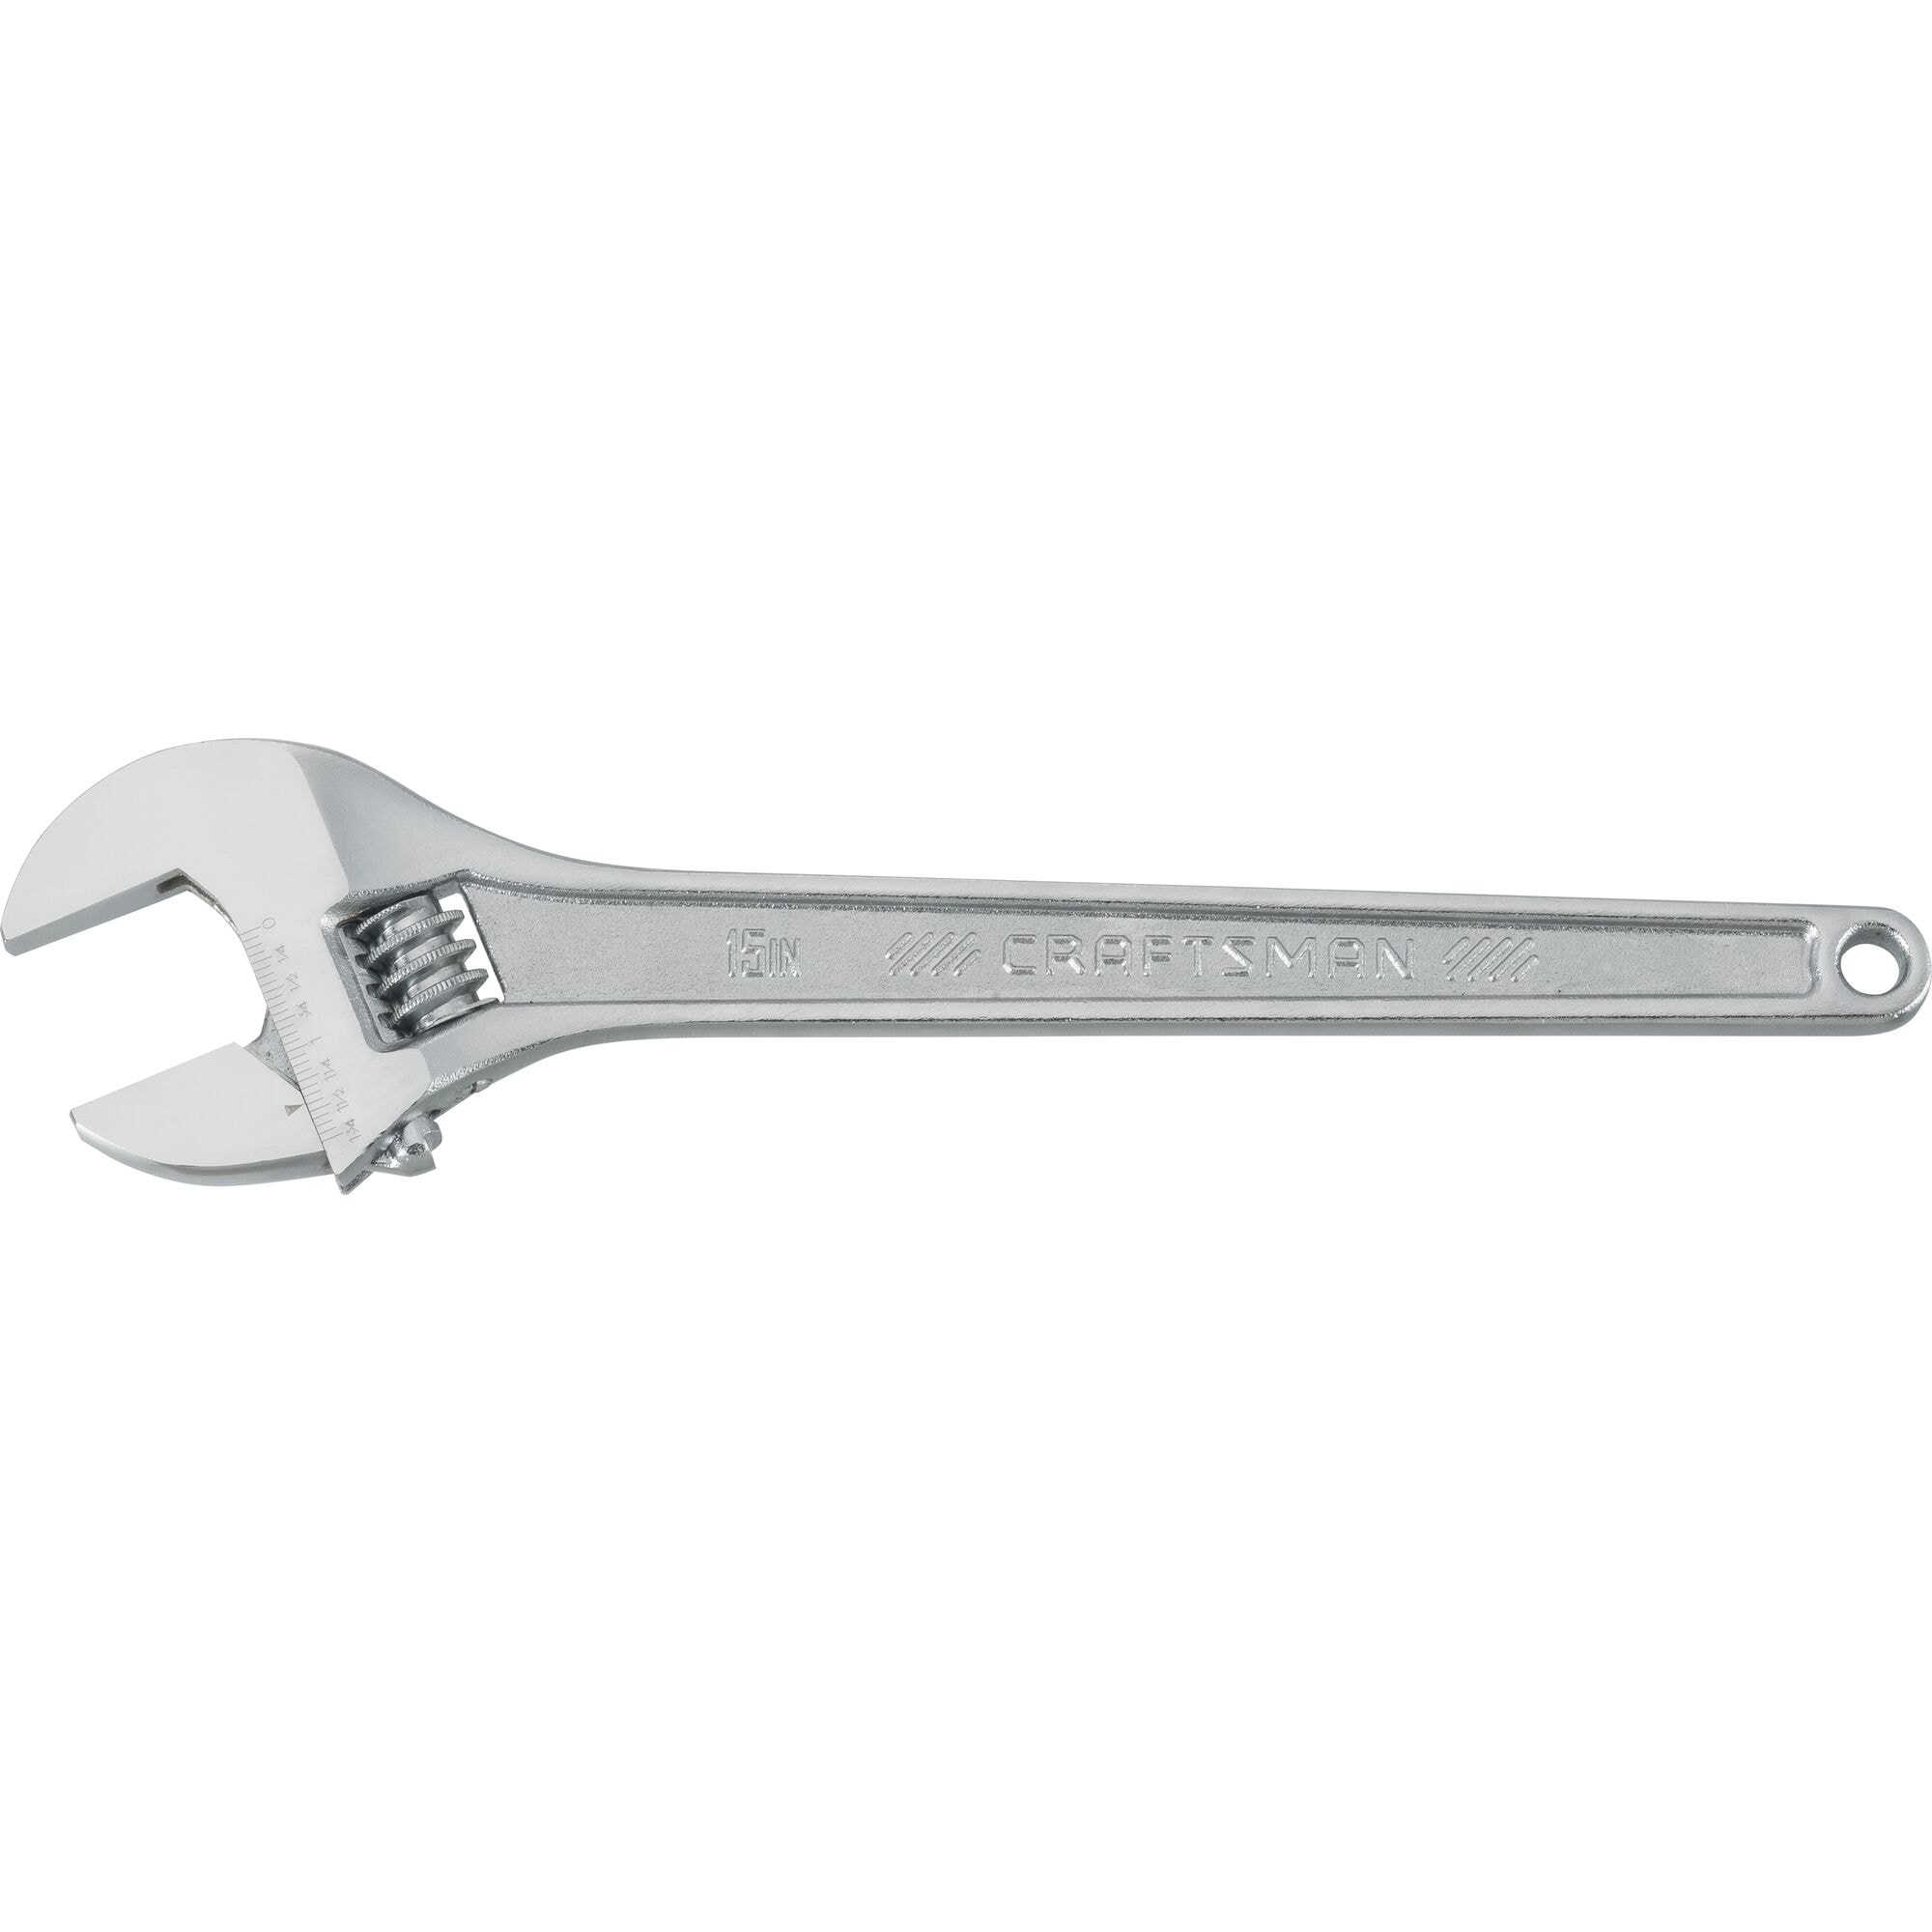 15-in. All Steel Adjustable Wrench | CRAFTSMAN